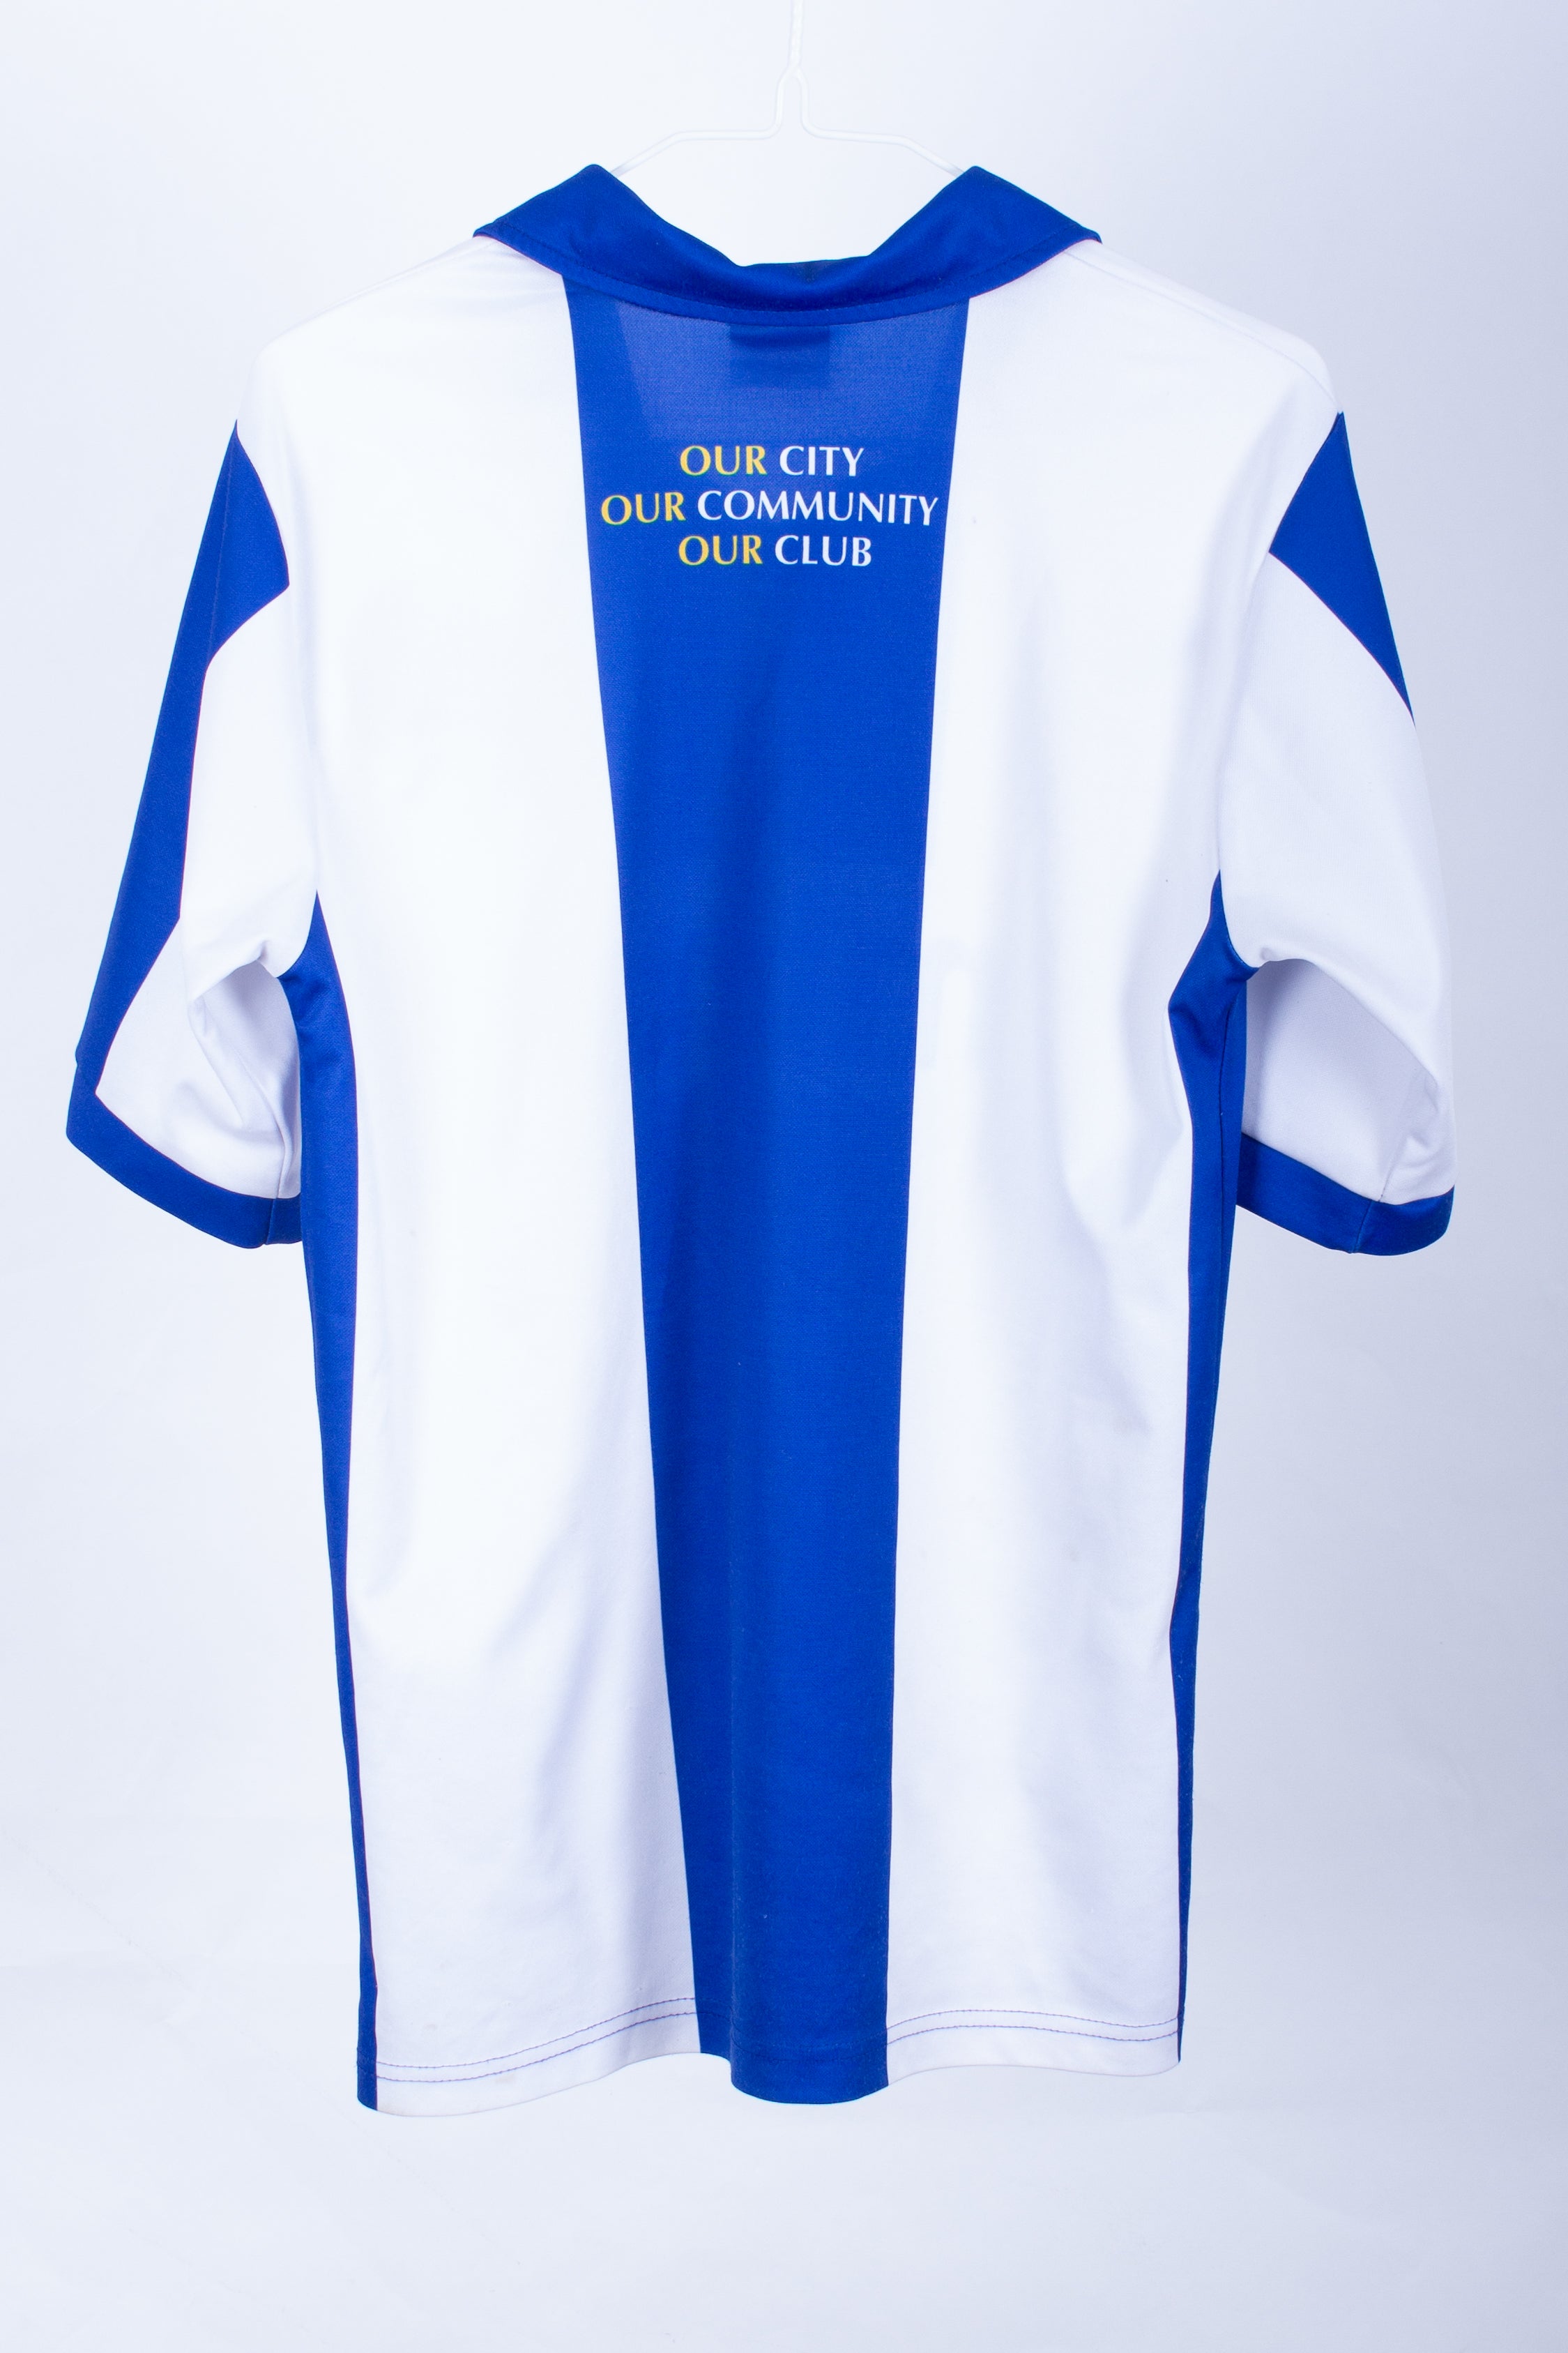 Chester FC 2012/14 Home Shirt (XS/S)